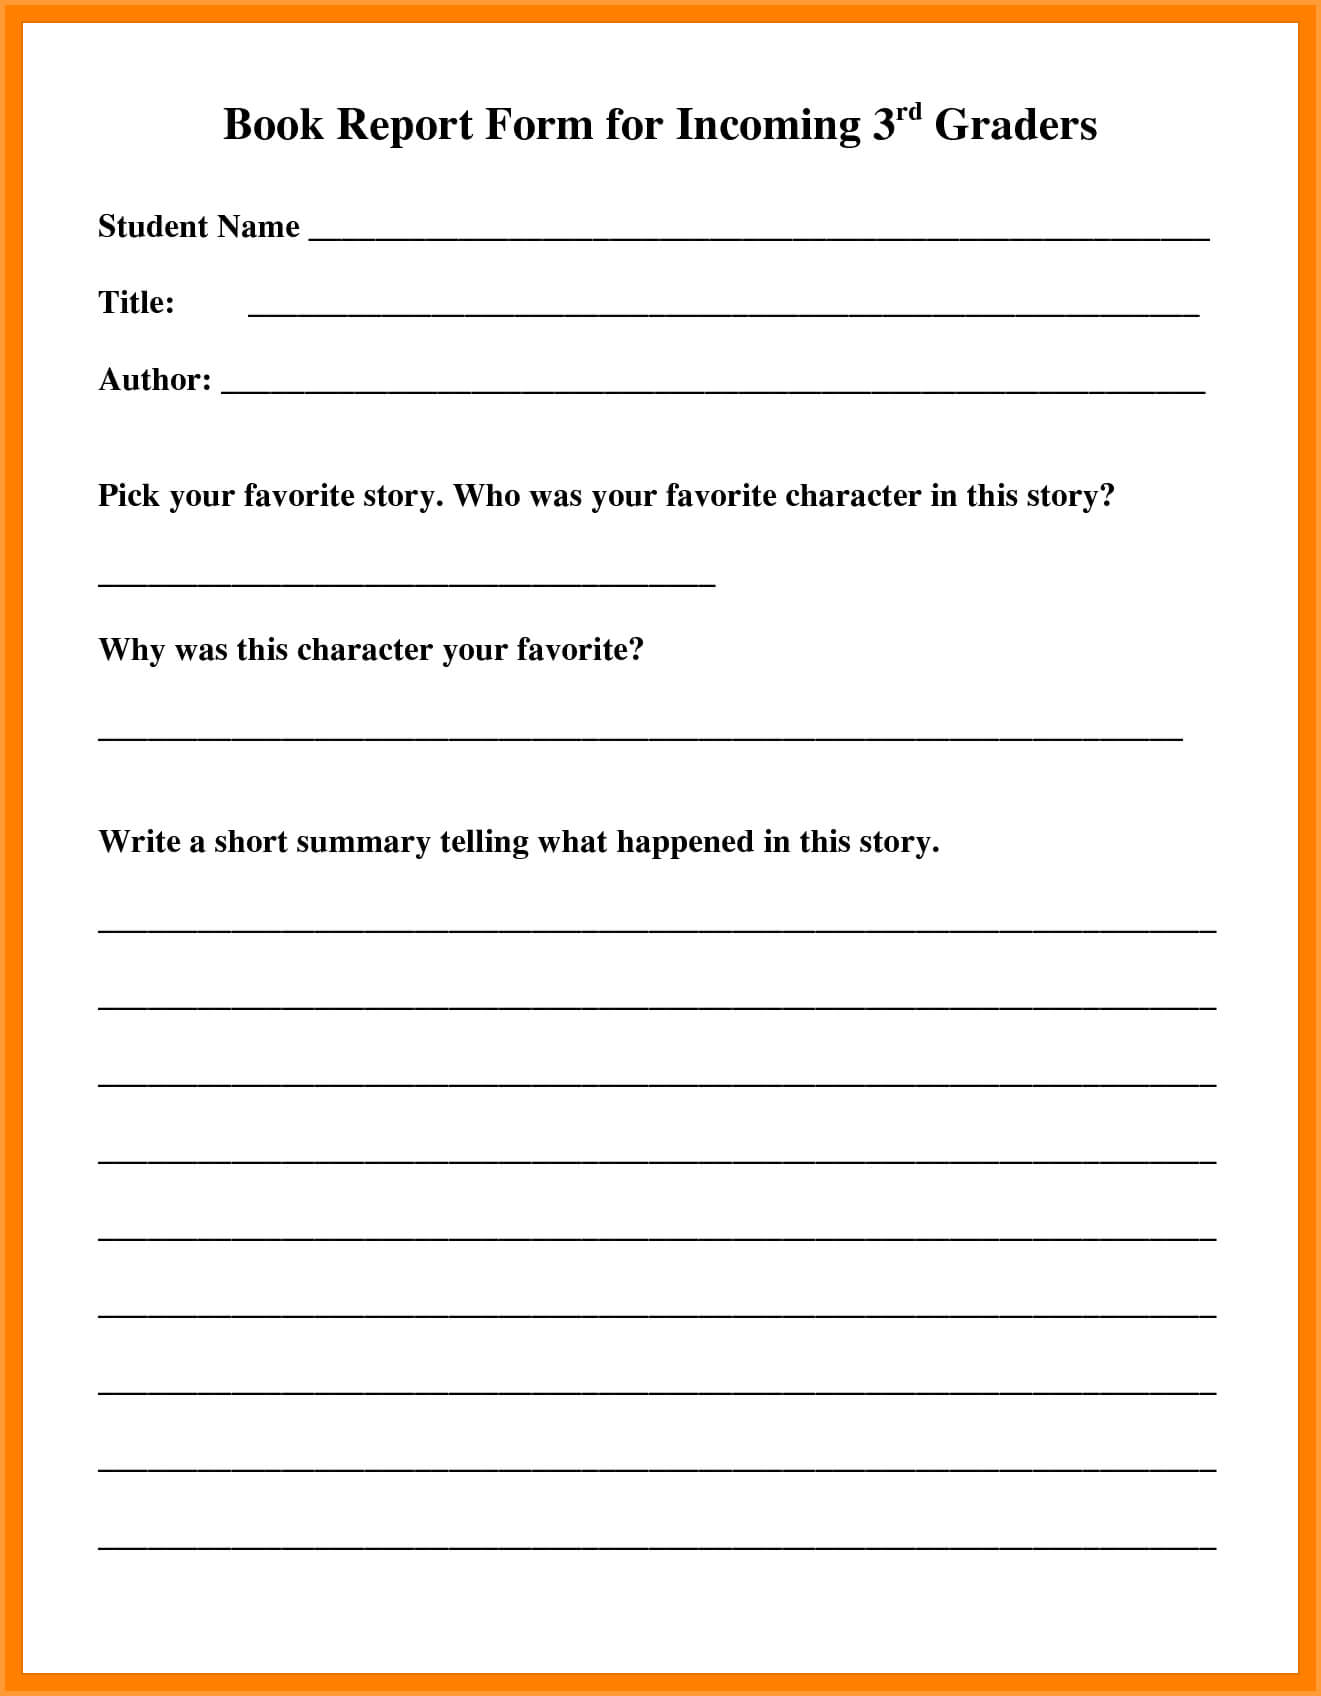 7+ Book Report For 3Rd Grade | Types Of Letter For Book Report Template 3Rd Grade